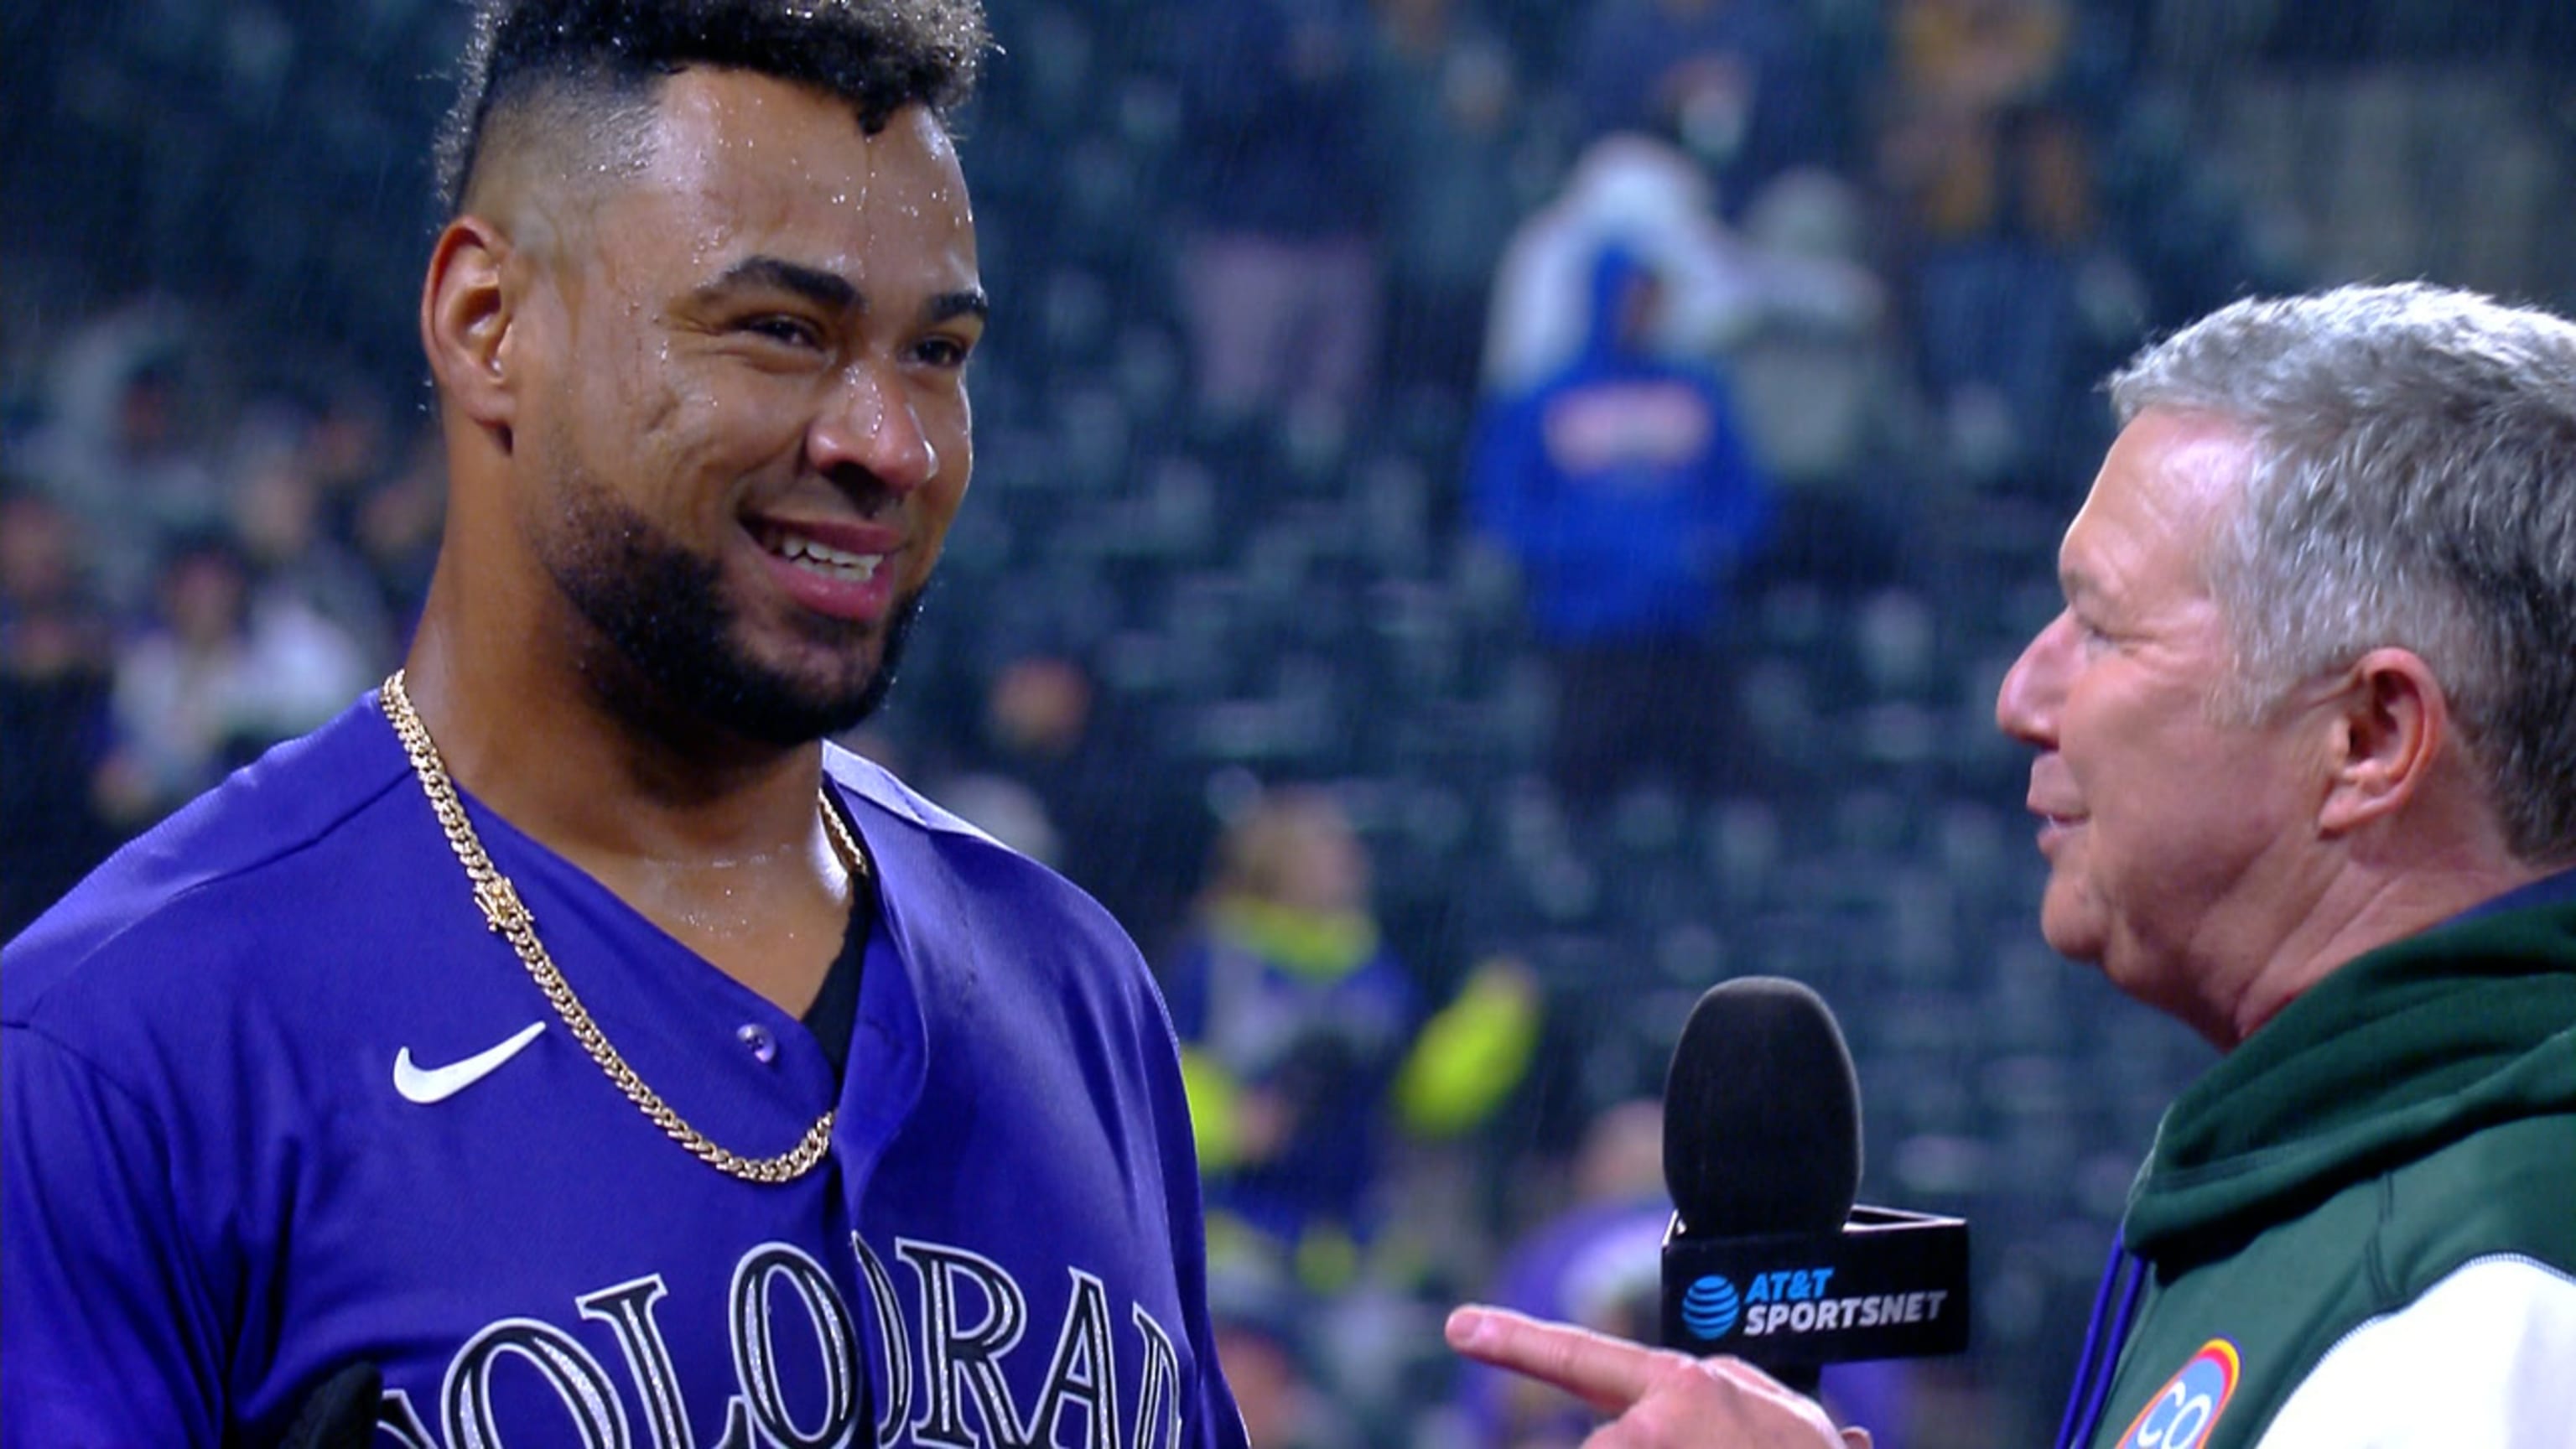 Rockies' Elias Díaz becomes unlikely All-Star MVP, 3 1/2 years